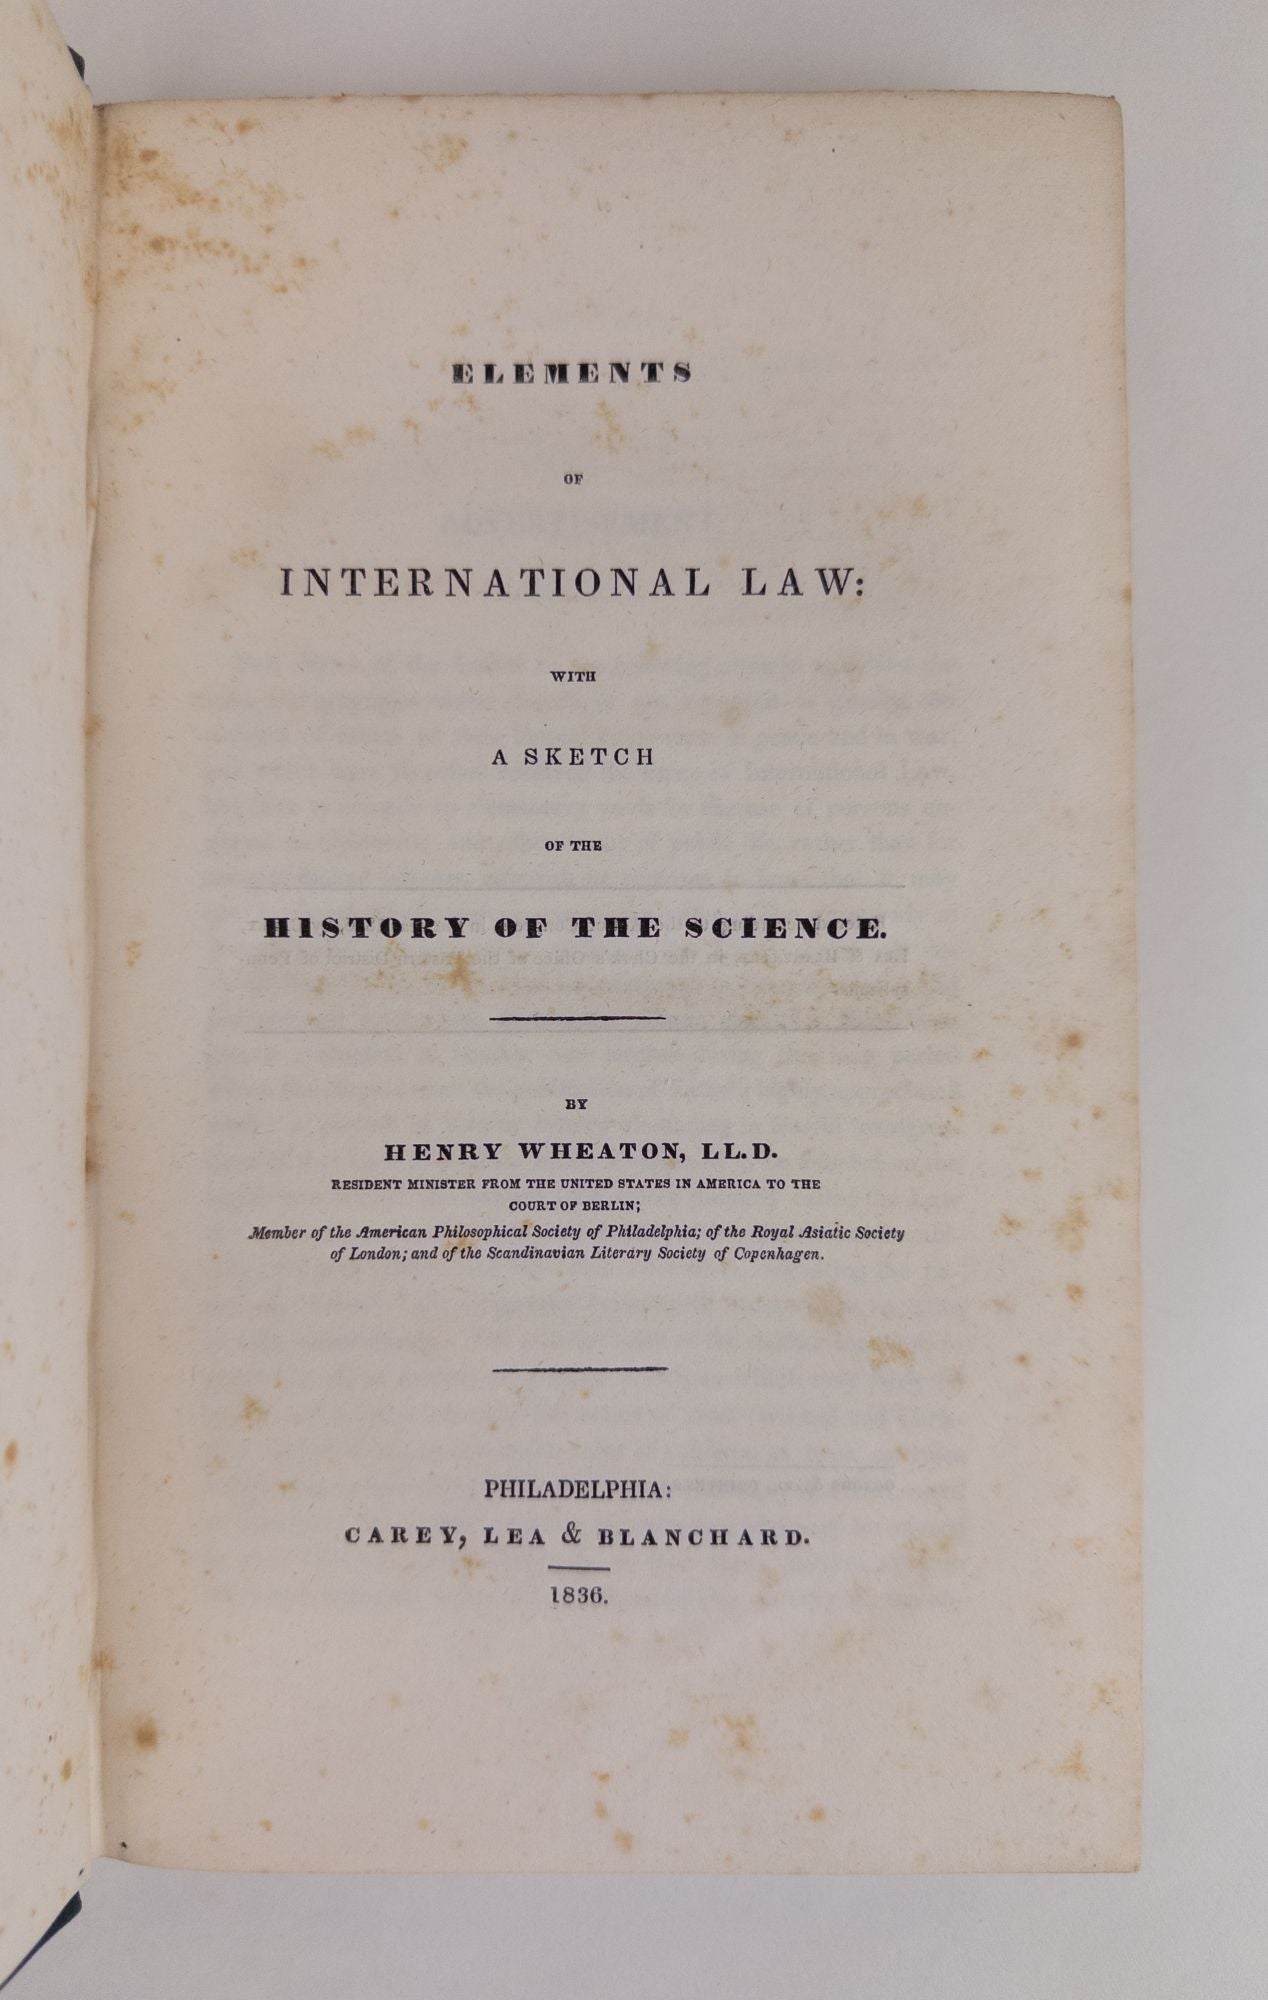 Product Image for ELEMENTS OF INTERNATIONAL LAW: WITH A SKETCH OF THE HISTORY OF THE SCIENCE